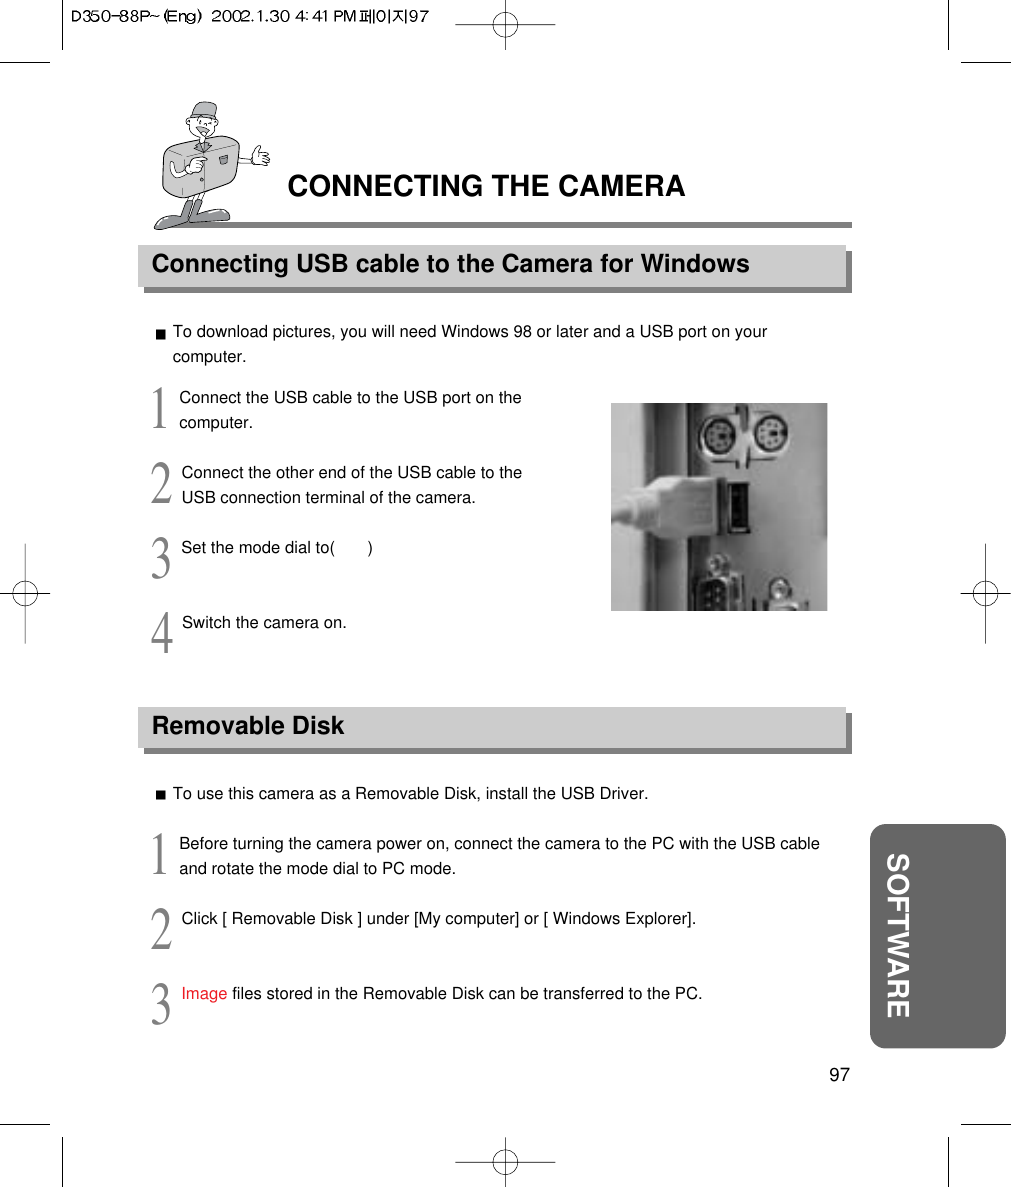 CONNECTING THE CAMERAConnecting USB cable to the Camera for Windows97SOFTWARETo download pictures, you will need Windows 98 or later and a USB port on yourcomputer.1Connect the USB cable to the USB port on thecomputer.2Connect the other end of the USB cable to theUSB connection terminal of the camera.3Set the mode dial to(       )4Switch the camera on.Removable DiskTo use this camera as a Removable Disk, install the USB Driver.1Before turning the camera power on, connect the camera to the PC with the USB cableand rotate the mode dial to PC mode.2Click [ Removable Disk ] under [My computer] or [ Windows Explorer].3Image files stored in the Removable Disk can be transferred to the PC.